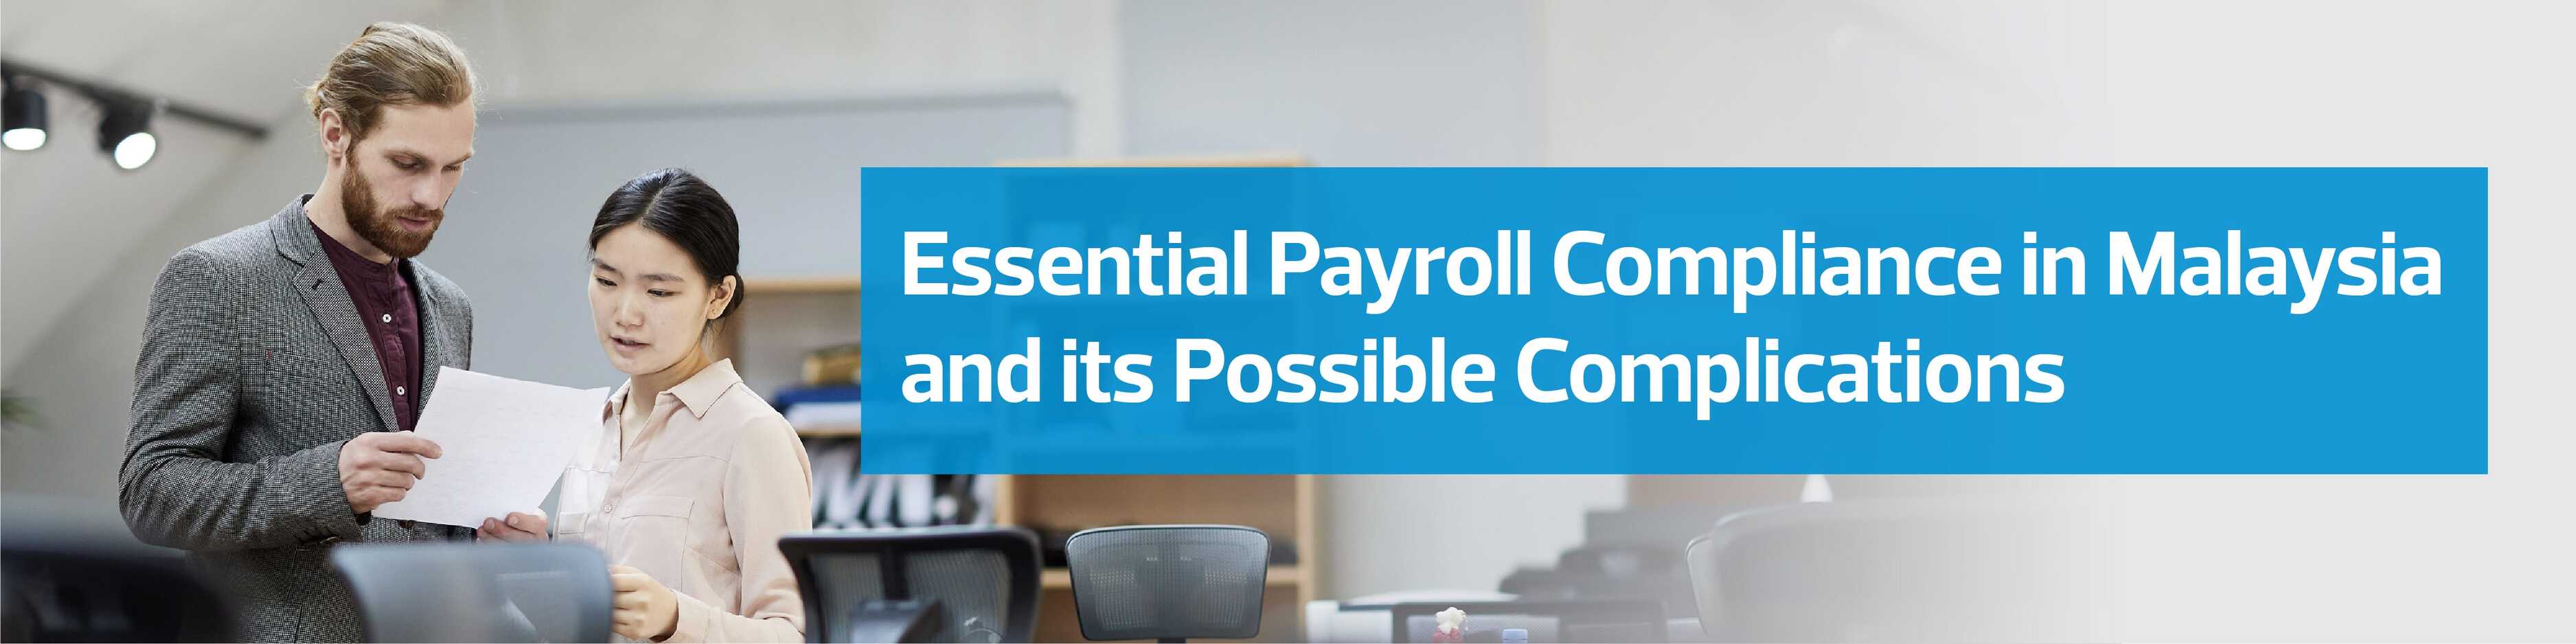 Essential Payroll Compliance in Malaysia and its Possible Complications